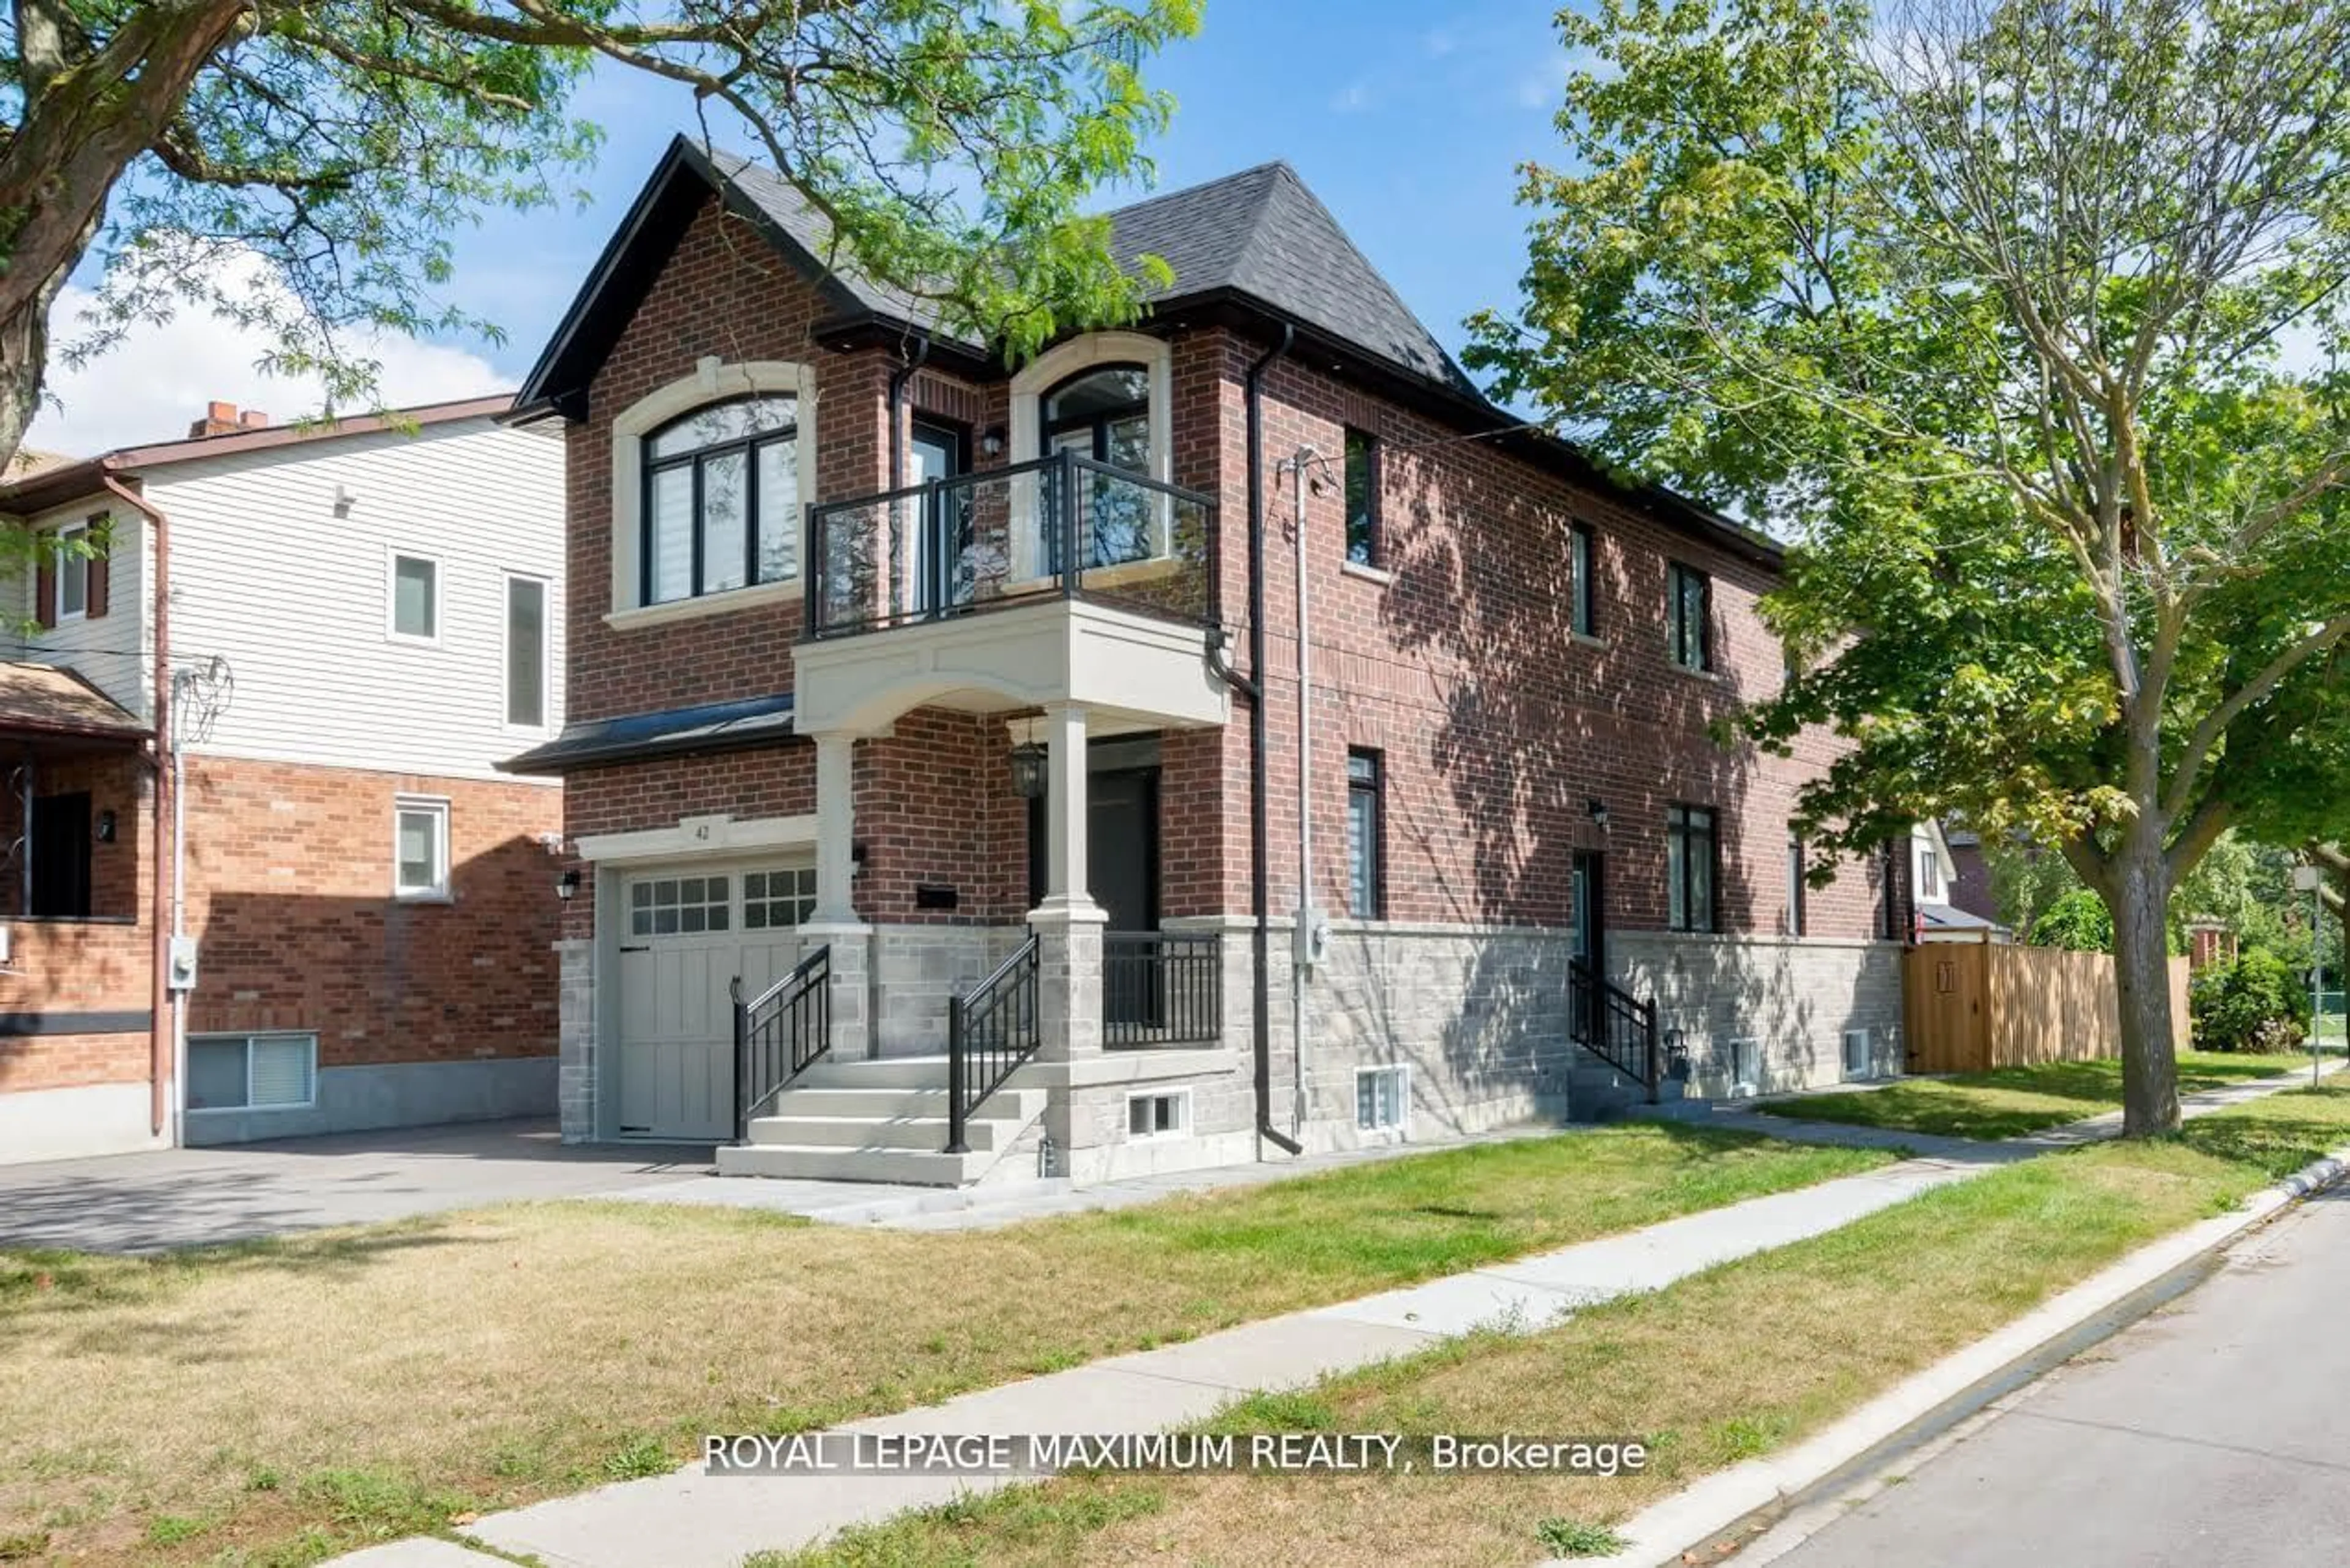 Home with brick exterior material for 42 Fairfield Ave, Toronto Ontario M8W 1R7